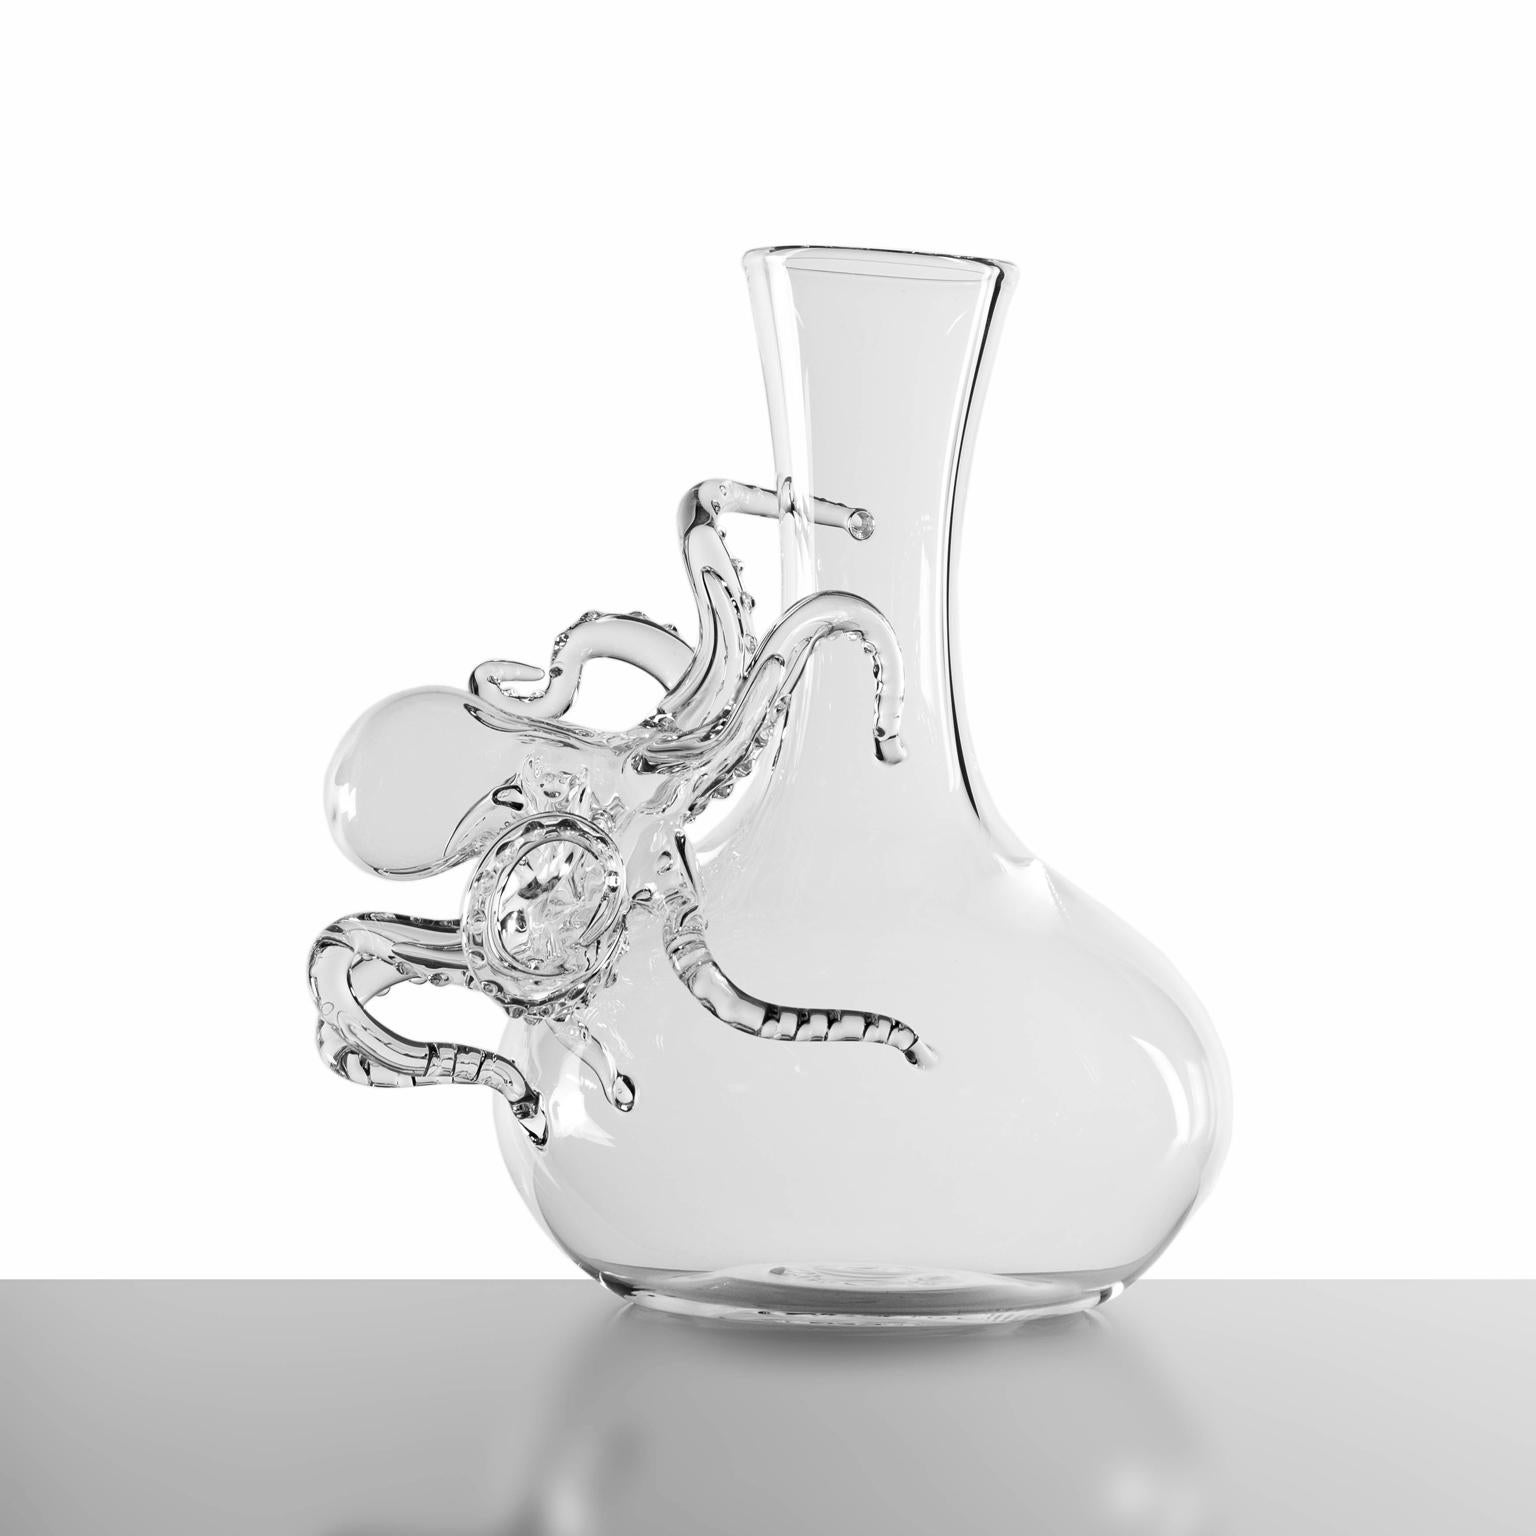 Contemporary Tentacle Hand-Blown Glass Wine Decanter by Simone Crestani

Introducing the Tentacle Decanter, a masterpiece of artistry and craftsmanship by the renowned glass artist Simone Crestani. As a part of the esteemed Polpo Collection, this